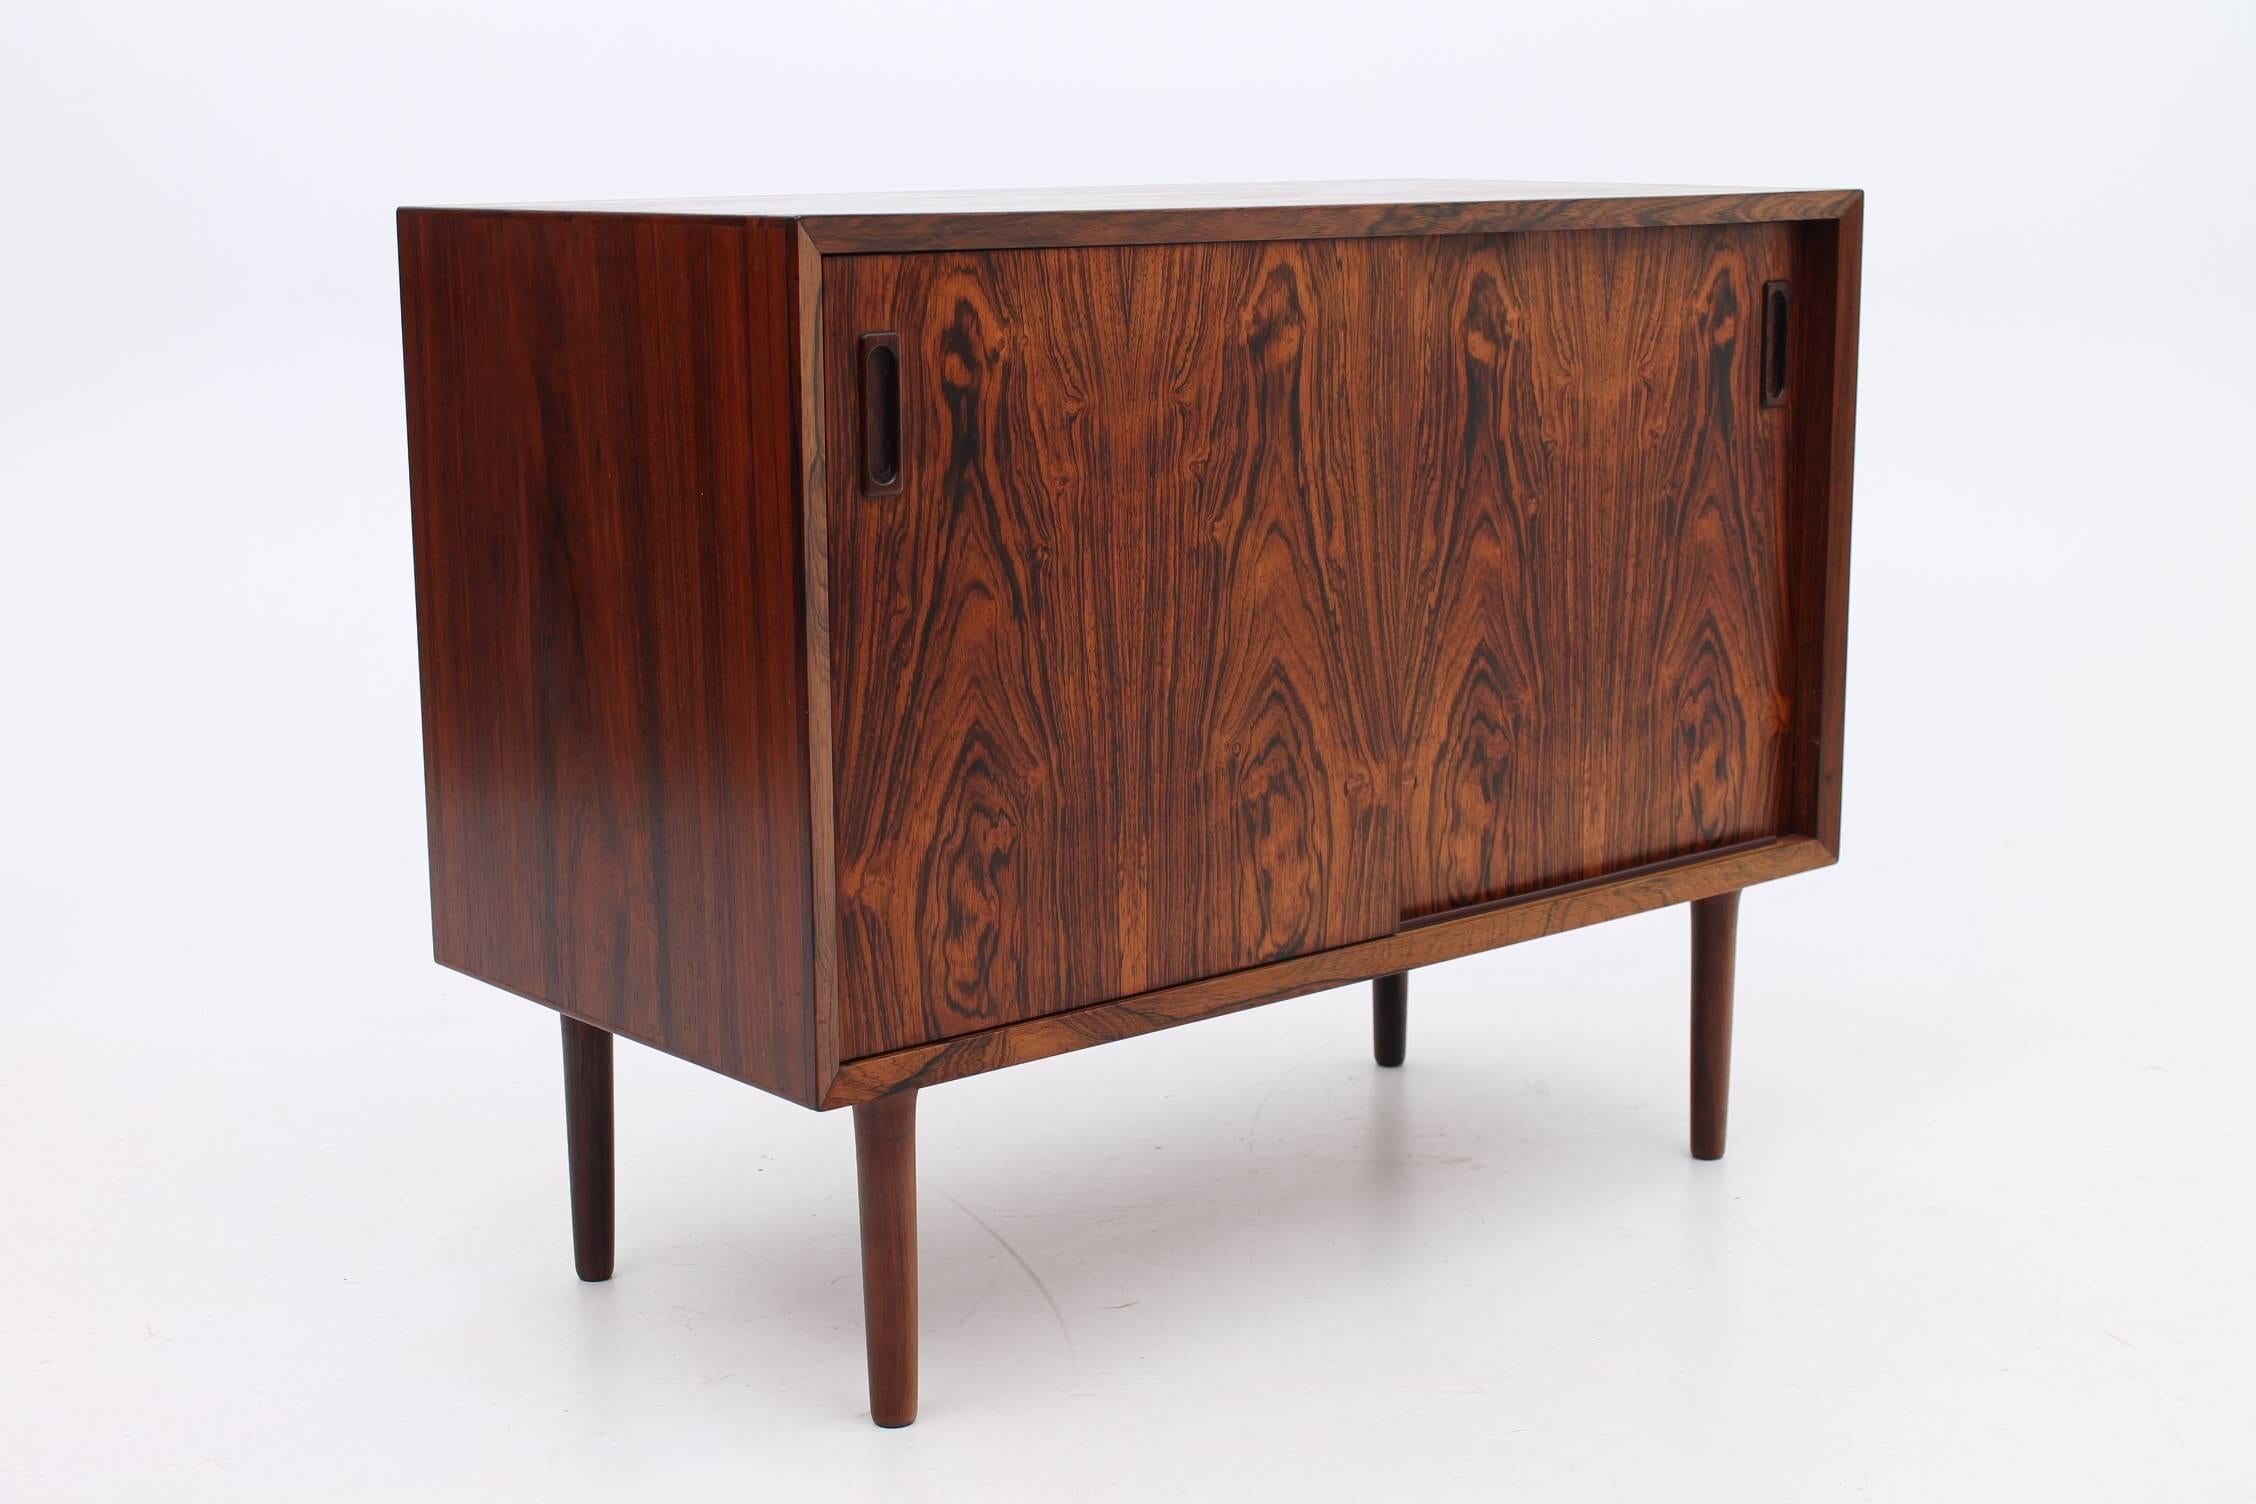 Rosewood cabinet and chest of drawers set designed by Lyby Møbler. This matching duo features a thick, vibrant rosewood grain that sets it apart from the rest. The set is incredibly versatile and can be pushed together to make one large, unique